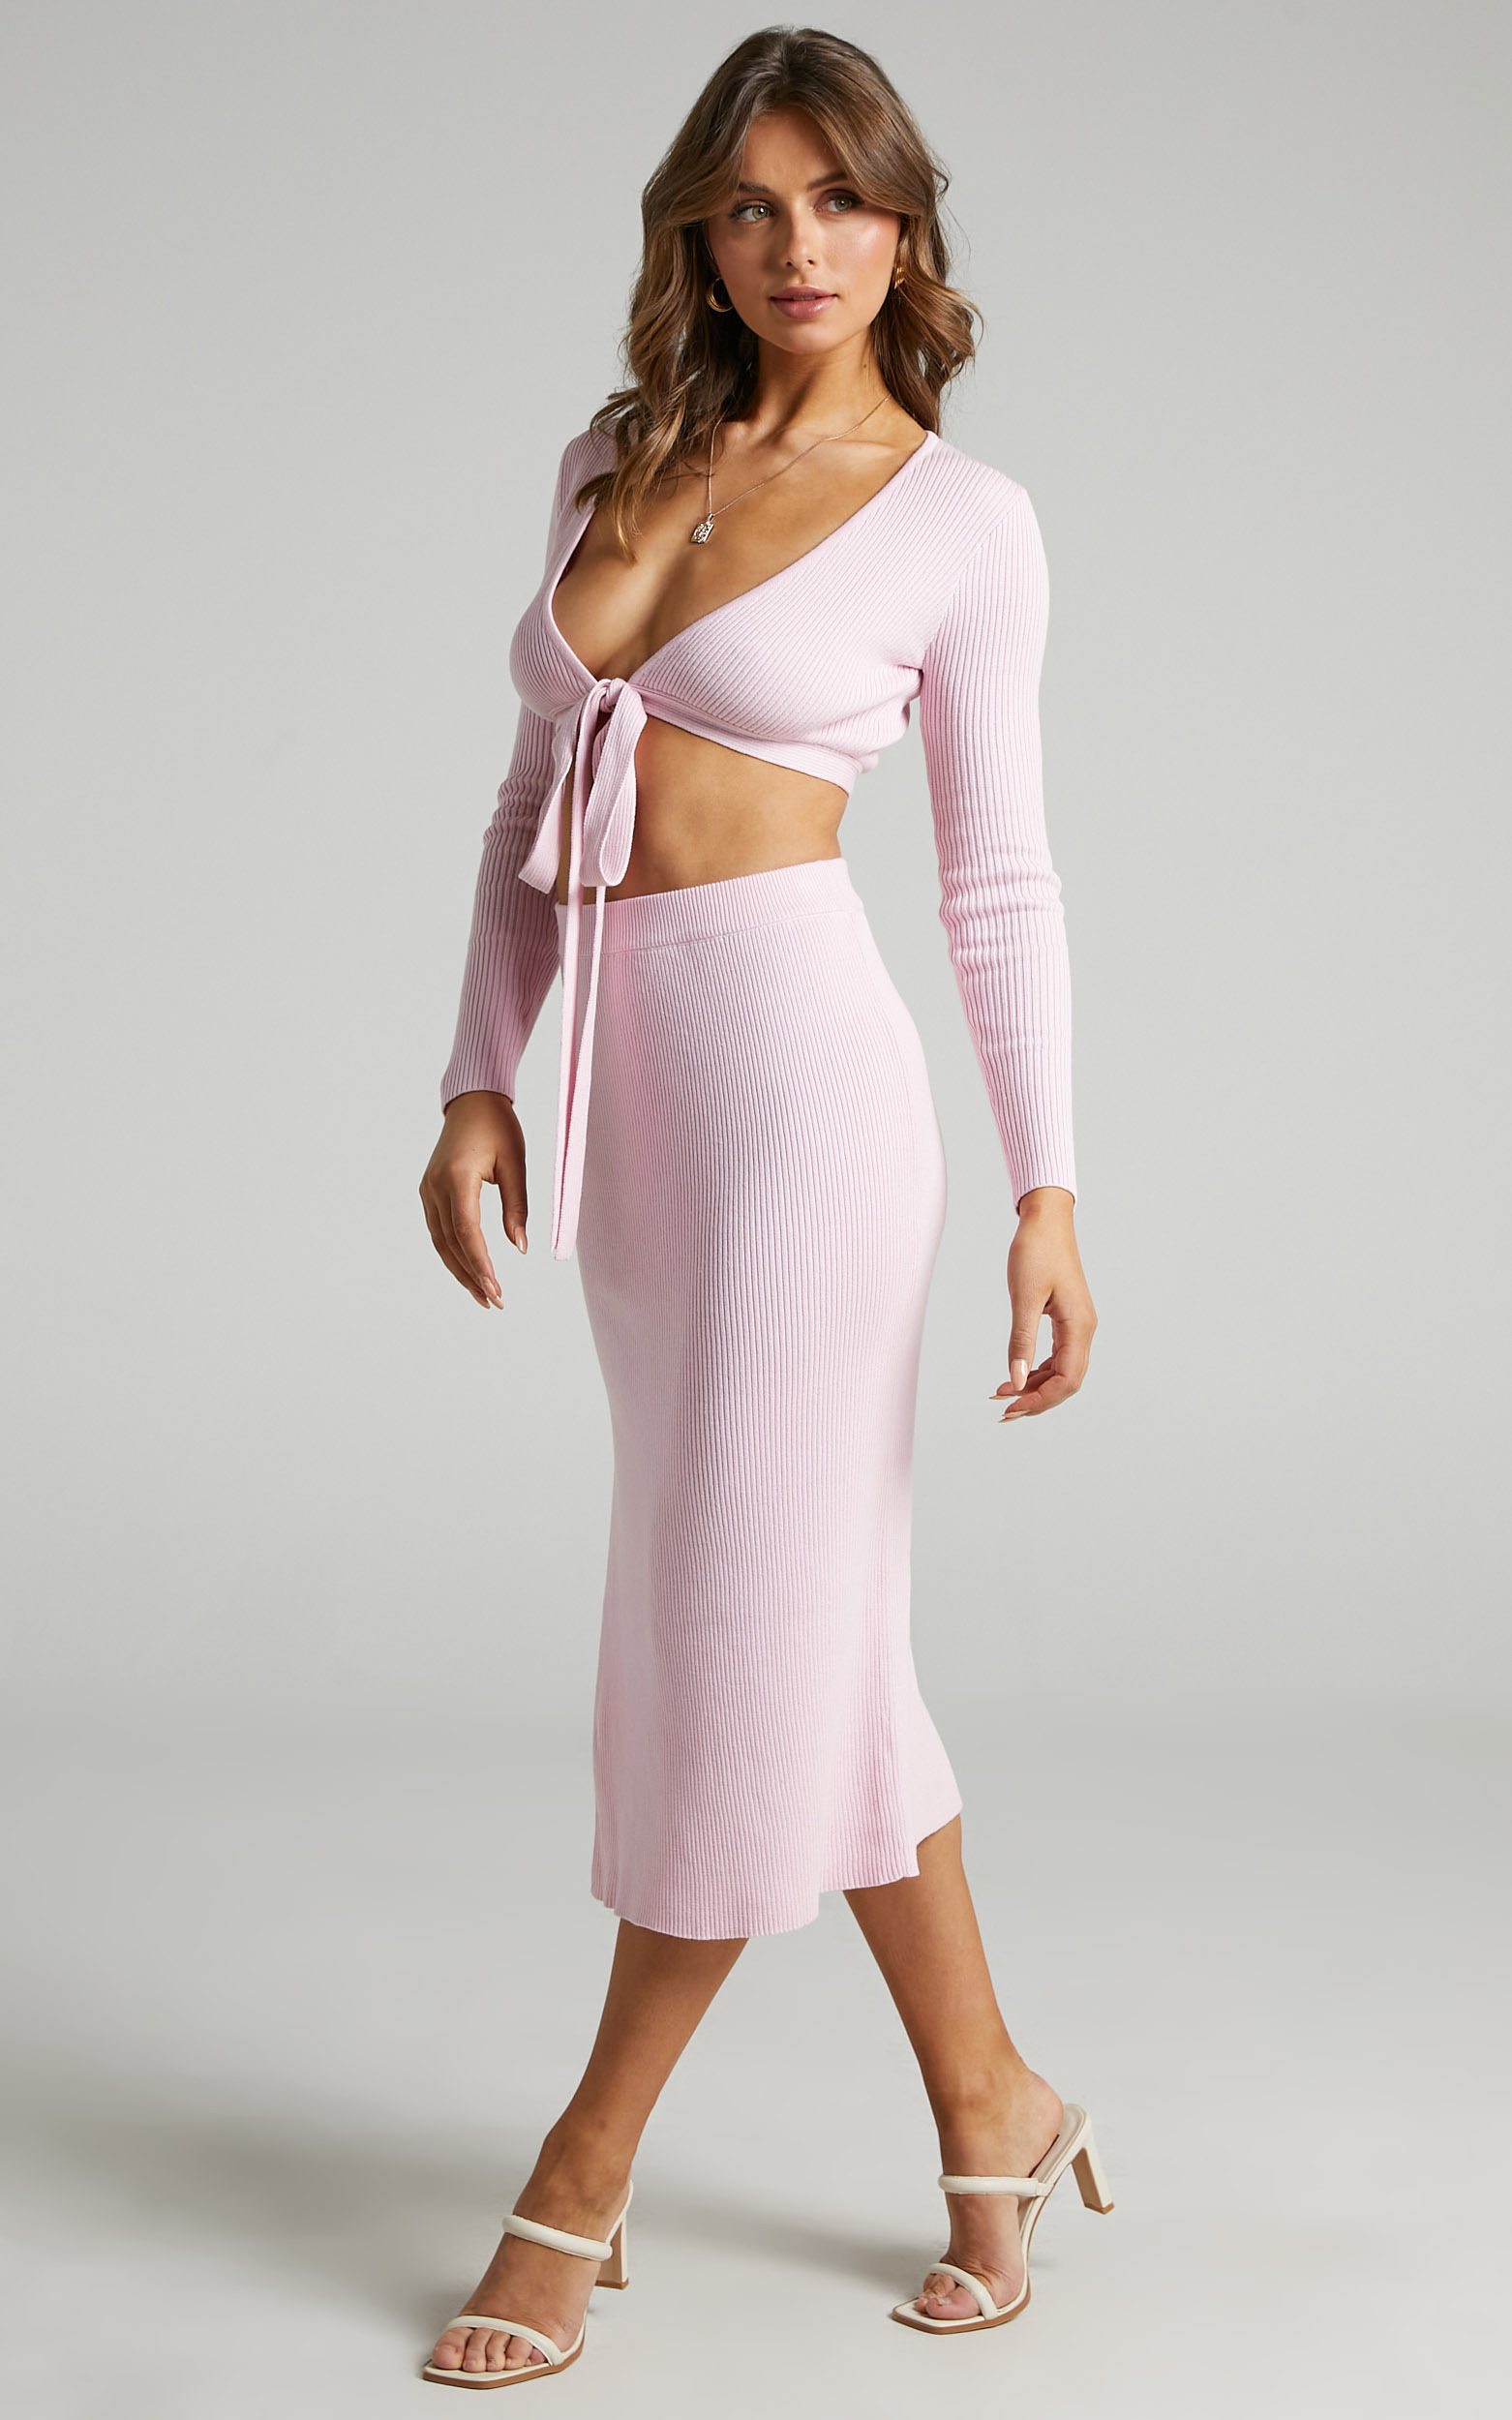 Tana Two Piece Knit Set with Knot Front in Ice Pink - 06, PNK1, hi-res image number null